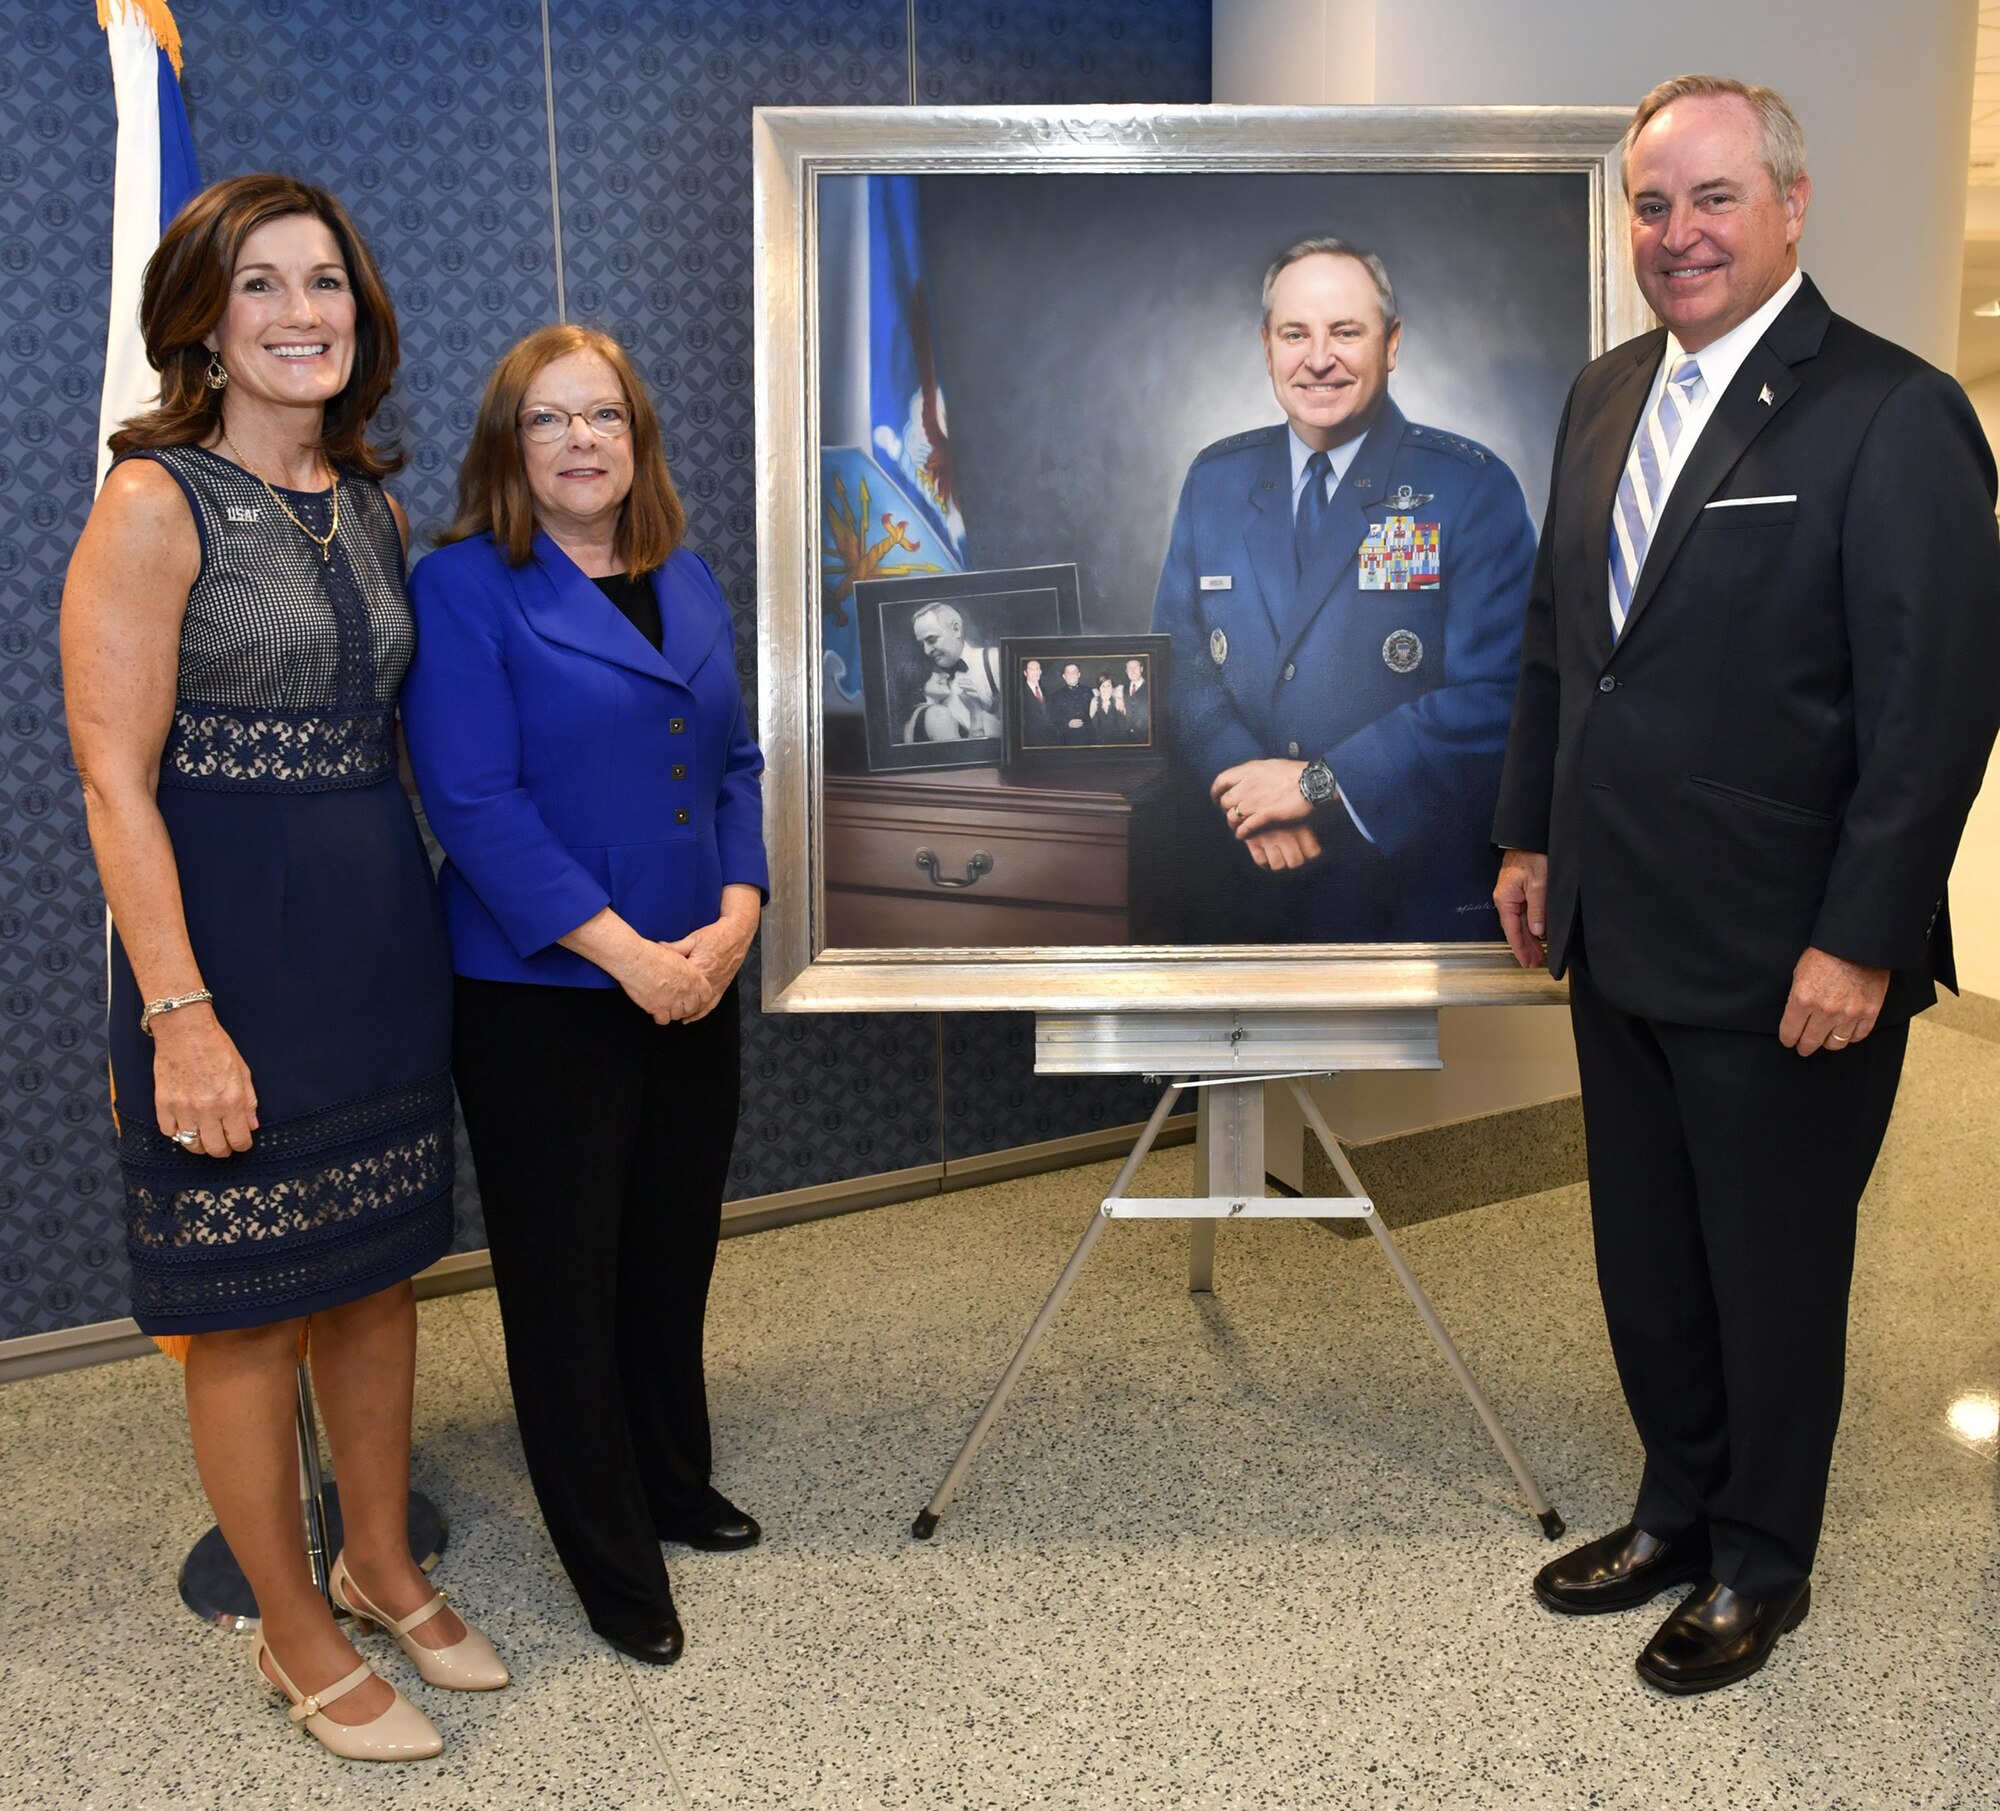 Retired Gen. Mark A. Welsh III, former chief of staff of the Air Force, and Betty Welsh pose with artist Michele Rushworth before the portrait unveiling ceremony in the Pentagon, Washington, D.C., Sept. 14, 2017. The portrait will be on display in the Pentagon's Arnold Corridor alongside the portraits of all the other former Air Force chiefs of staff. (U.S. Air Force photo by Wayne A. Clark)